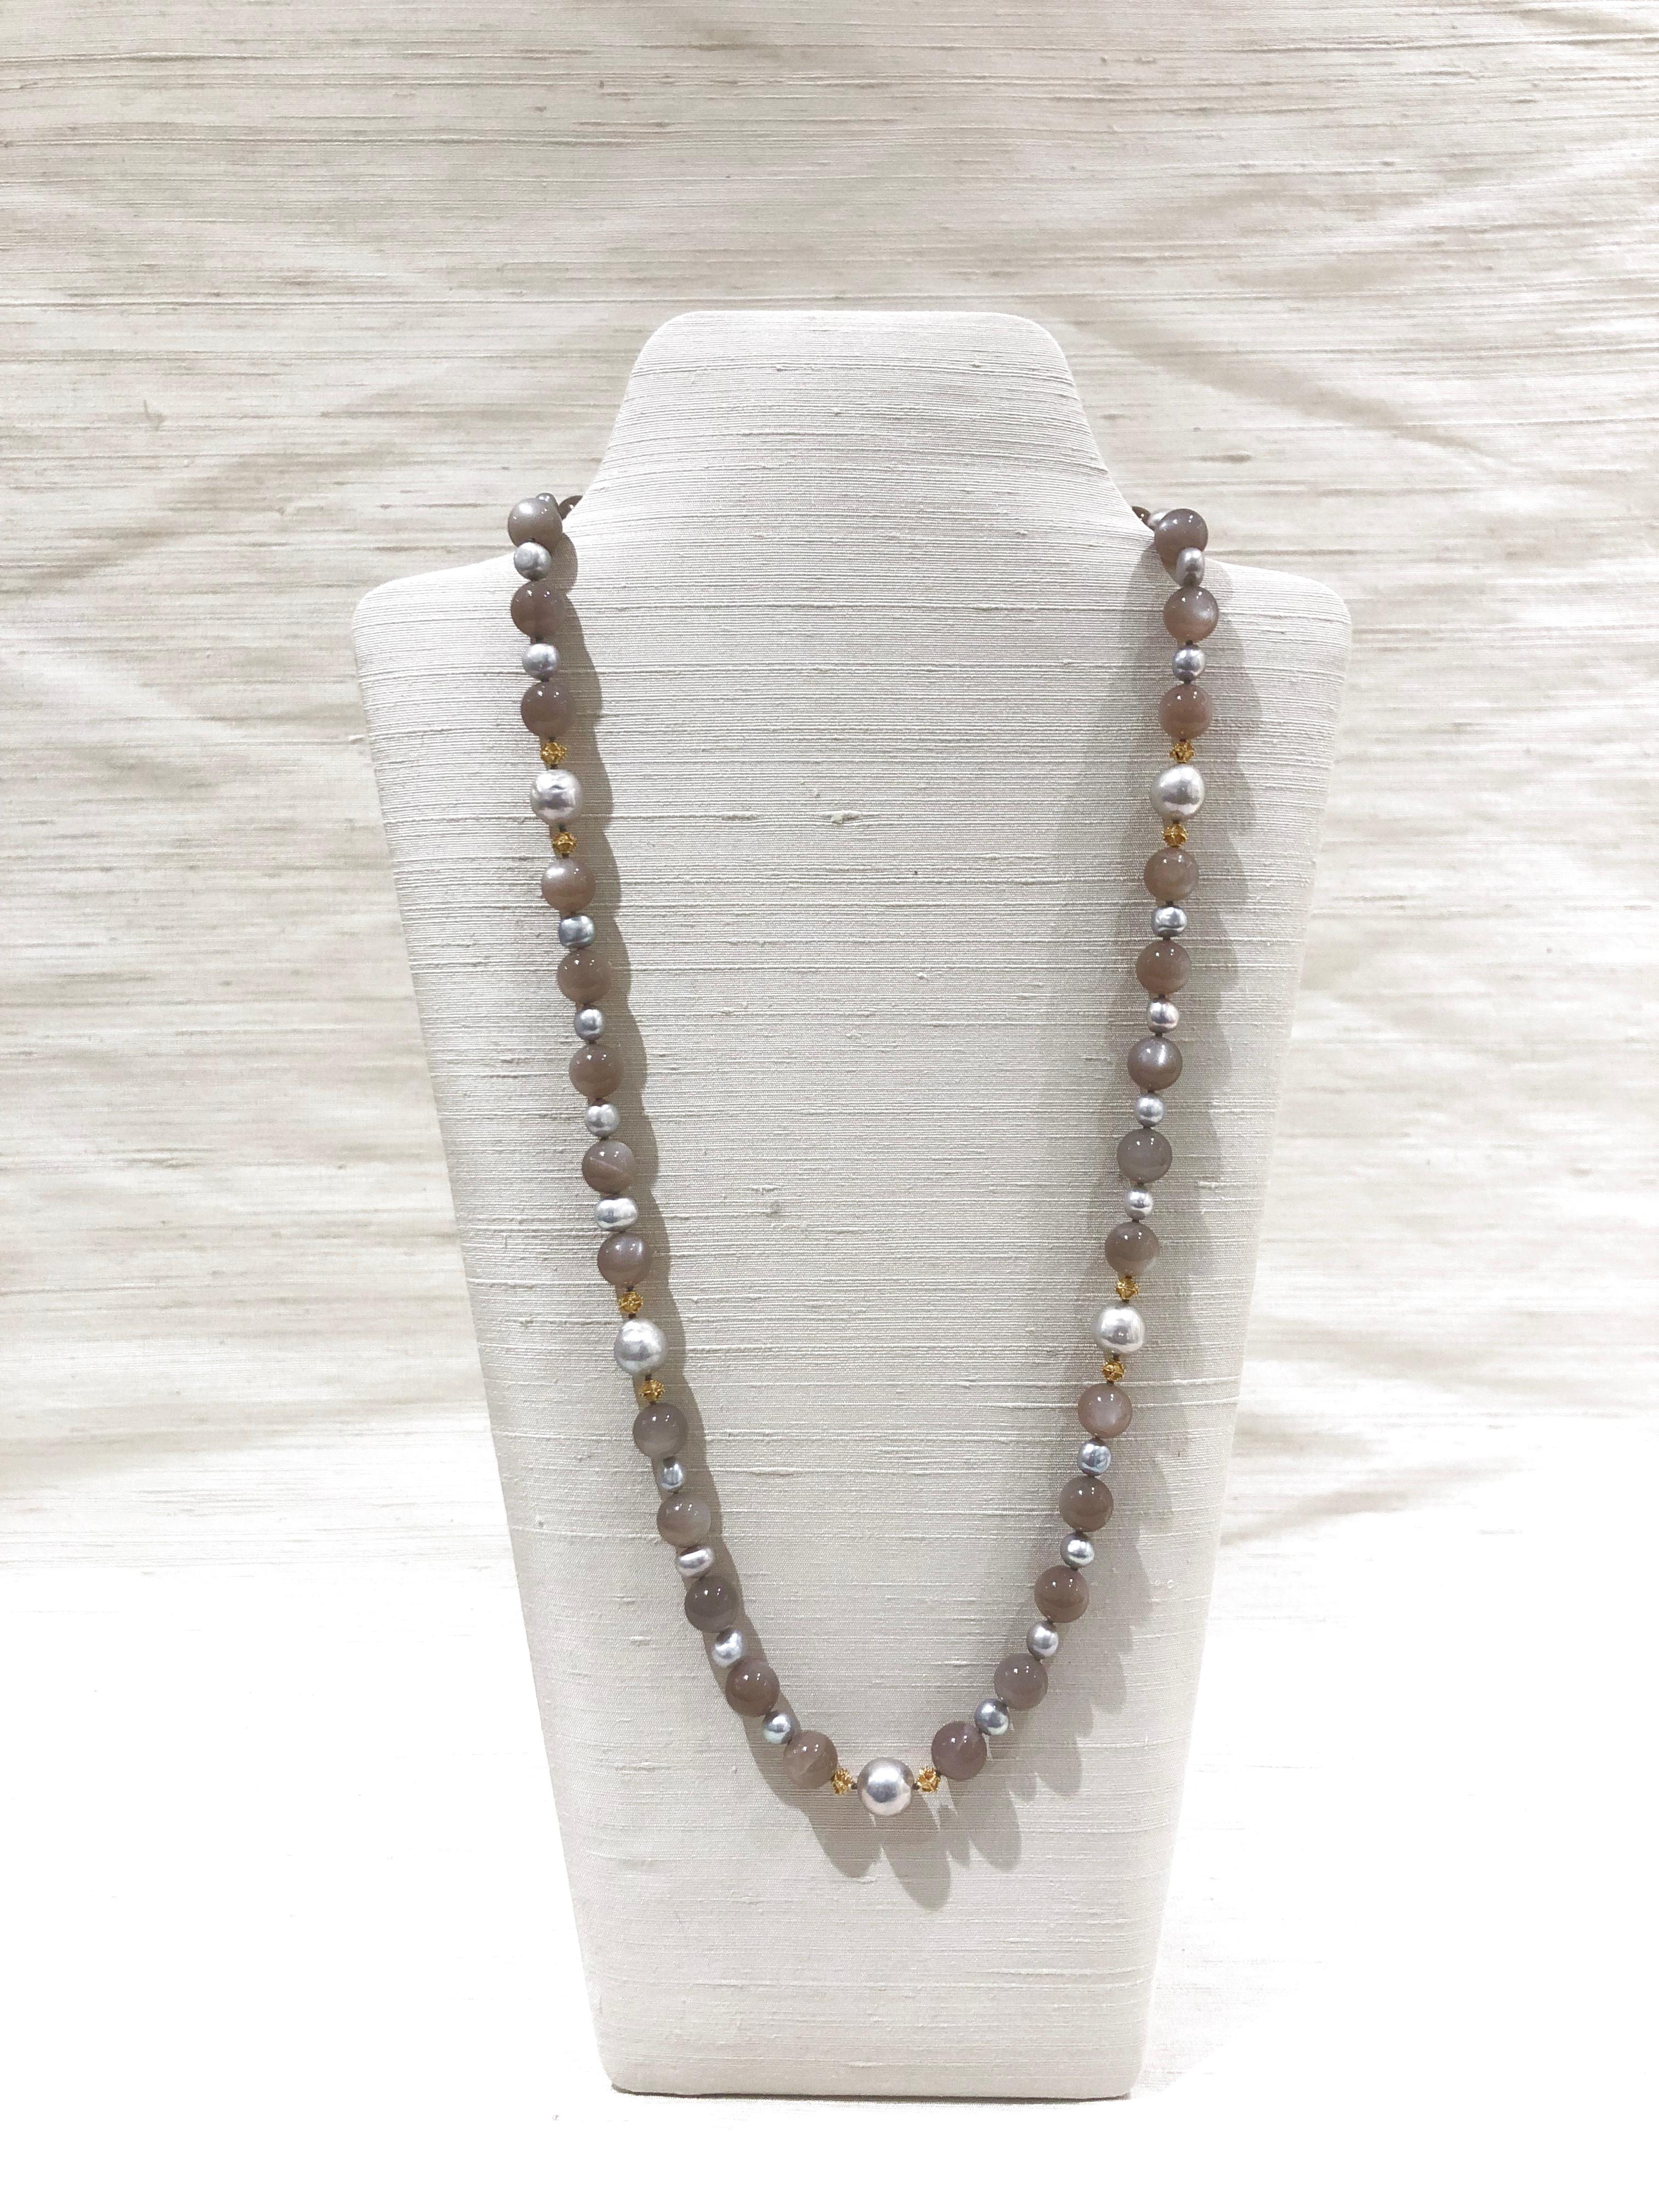 31 in (78.5cm) necklace with grey moonstone, freshwater pearls and 18K gold beads. 
A beautiful long necklace with lustrous soft grey moonstone beads enhanced by freshwater pearls and rhombus form 18 K gold beads.
